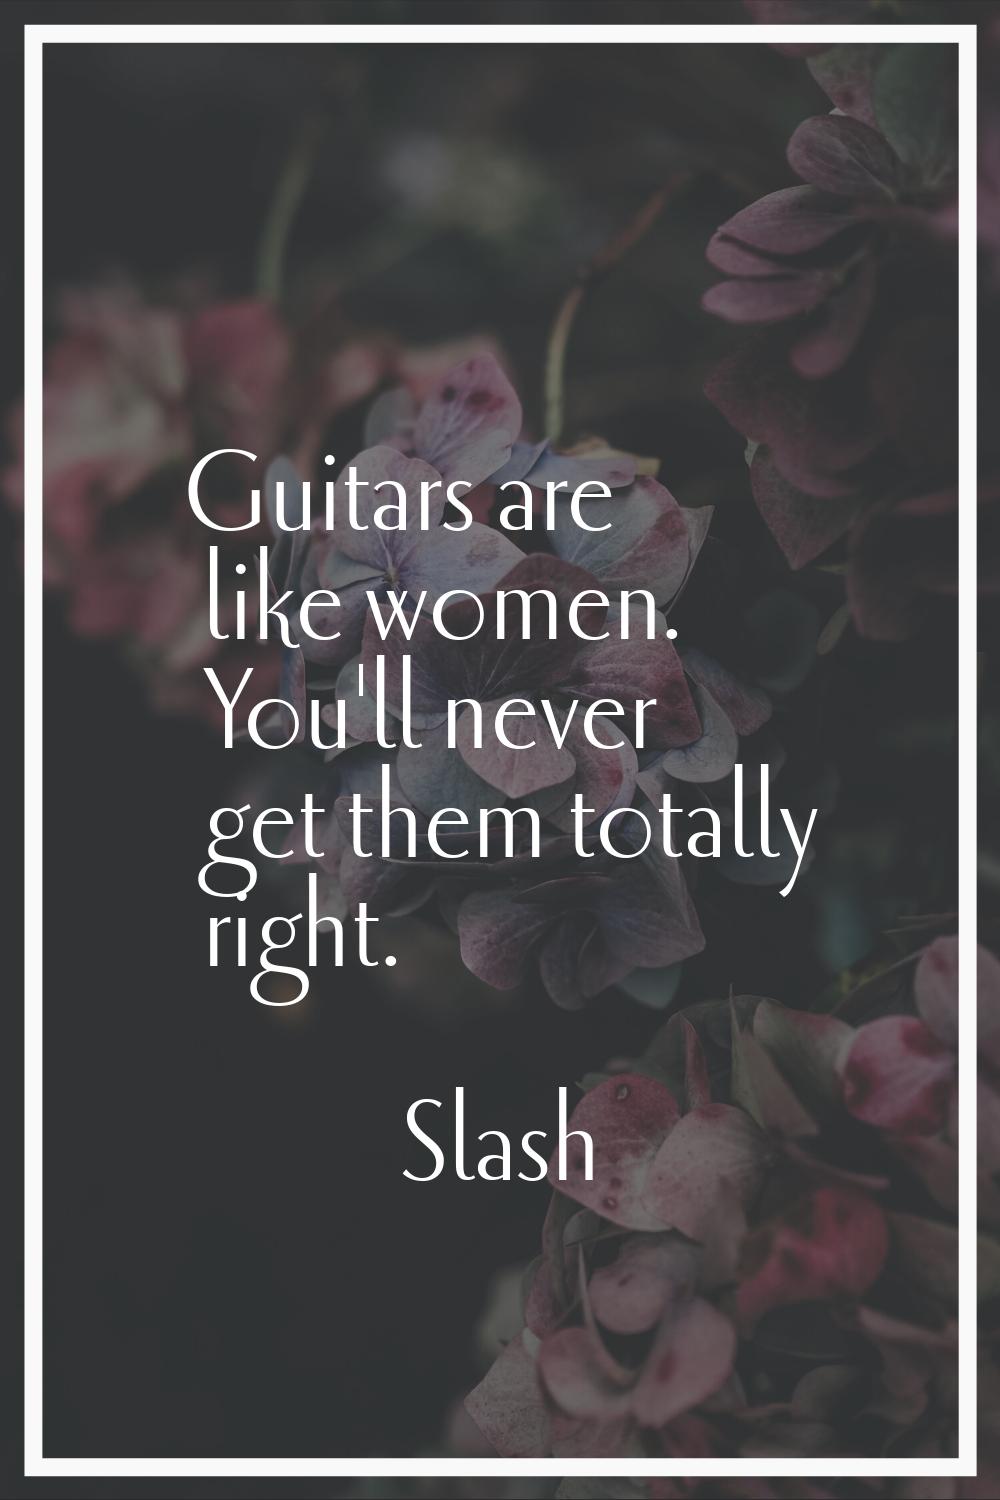 Guitars are like women. You'll never get them totally right.